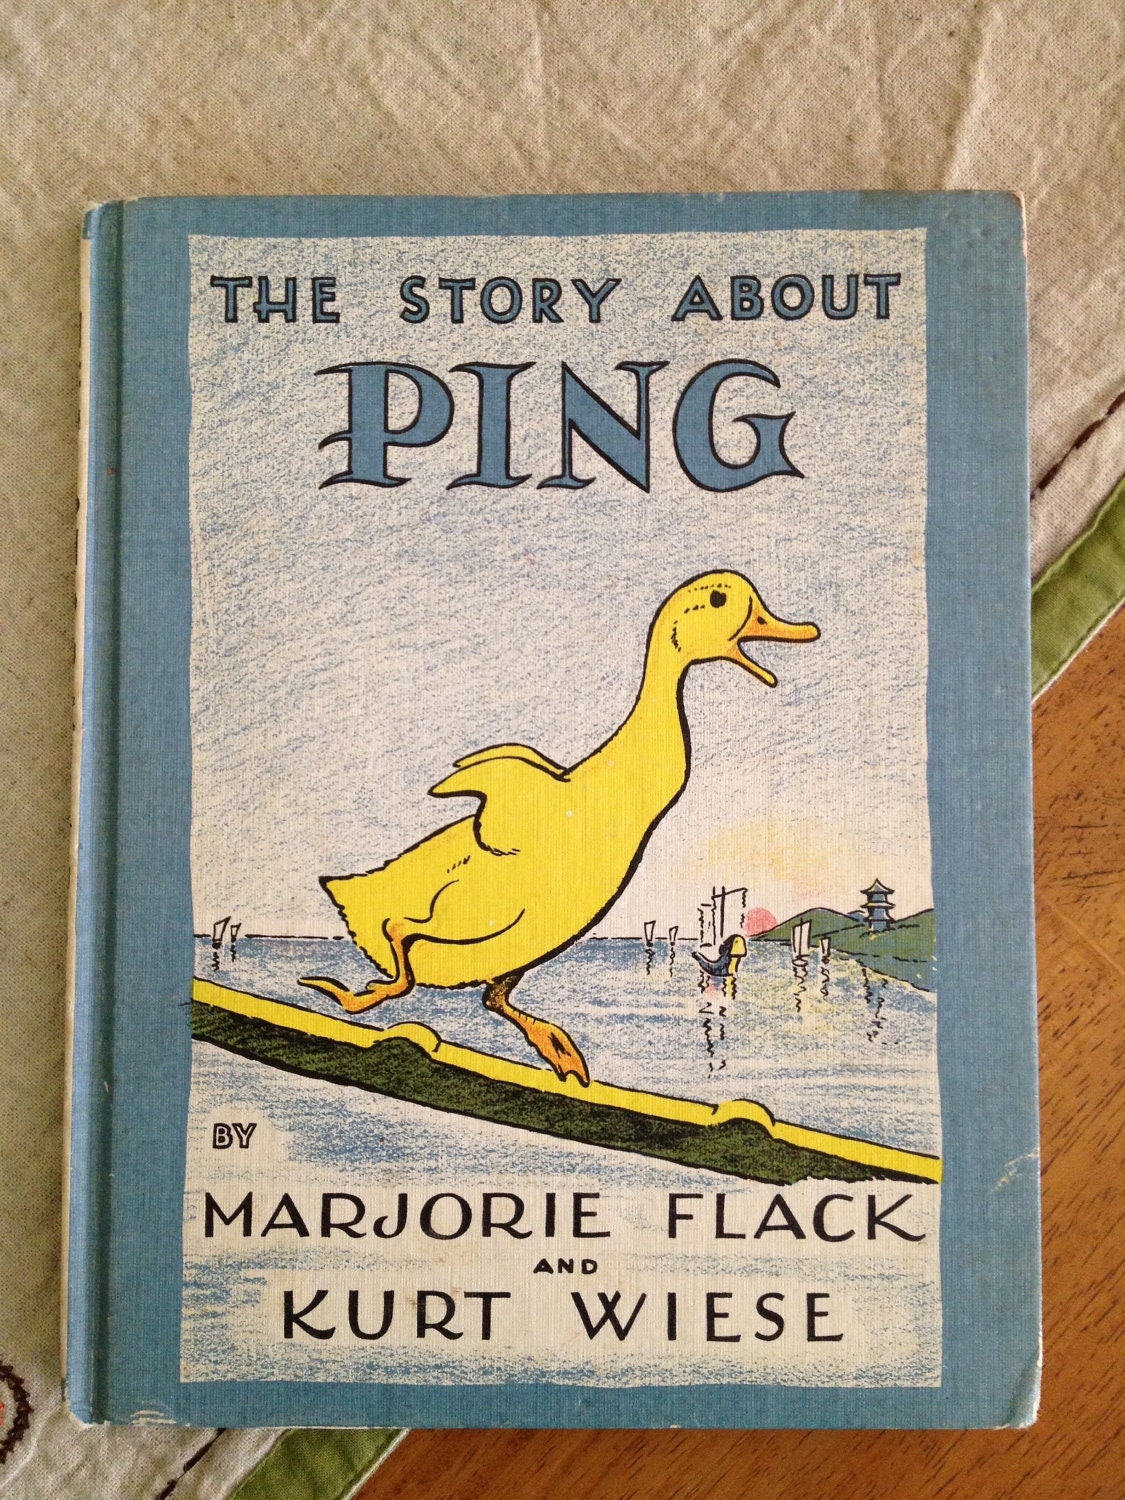 the story about ping by marjorie flack